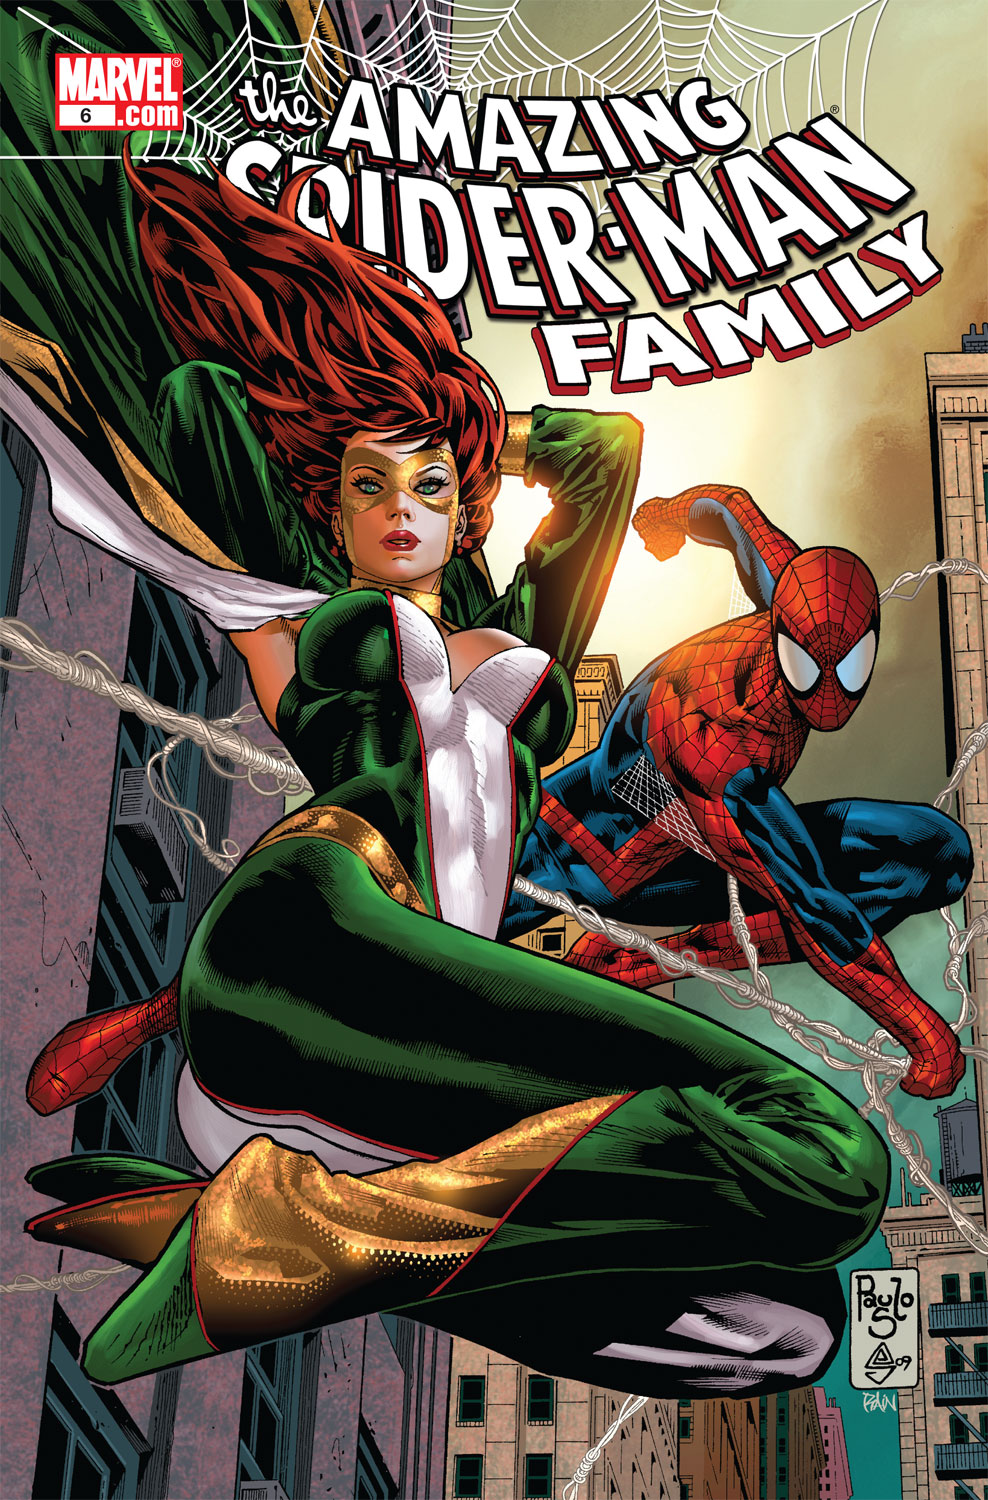 Spider-Man Family Featuring Spider-Man's Amazing Friends (2006), Comic  Series